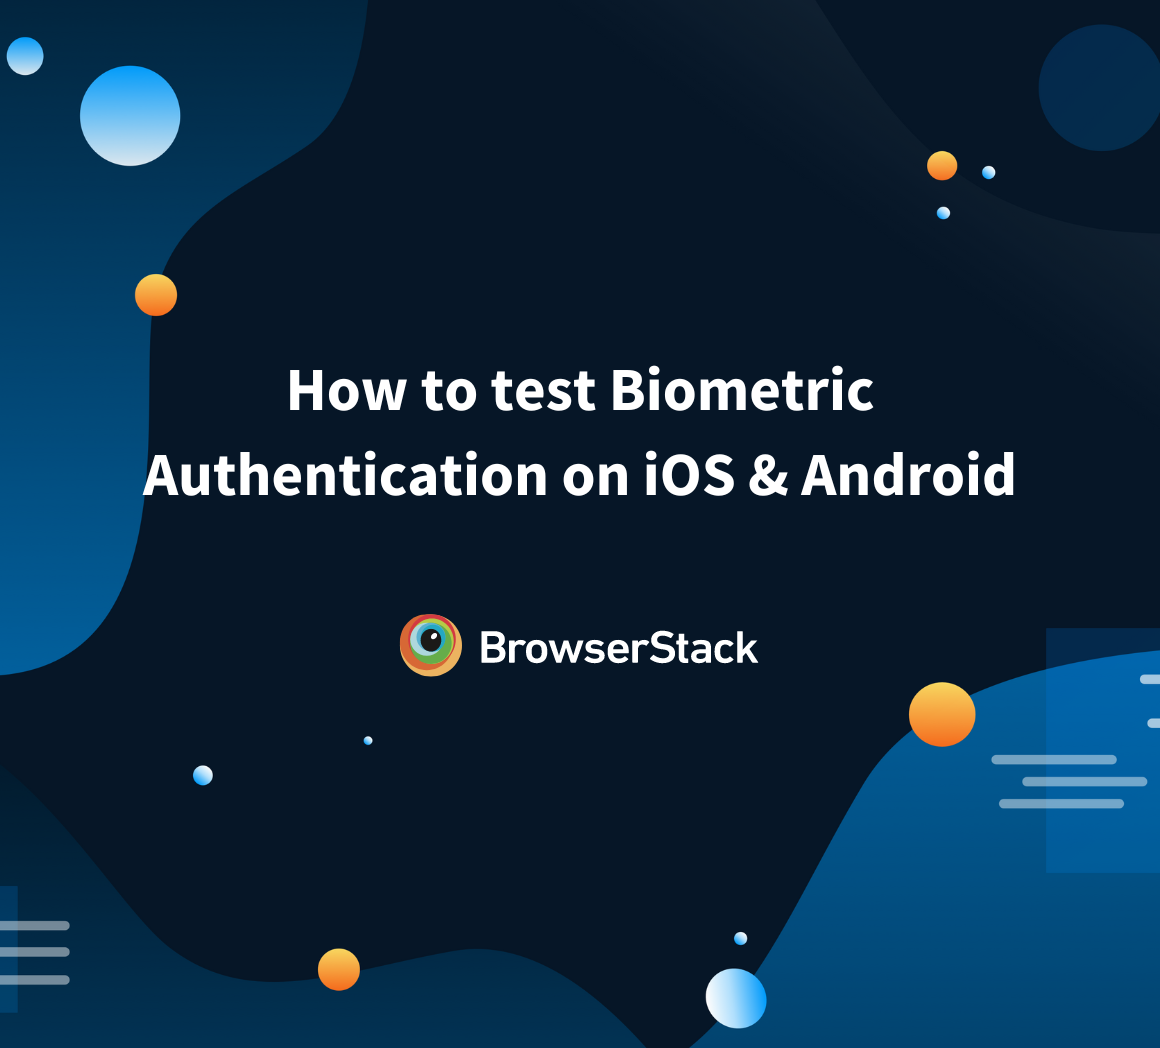 How to test Biometric authentication using Appium?